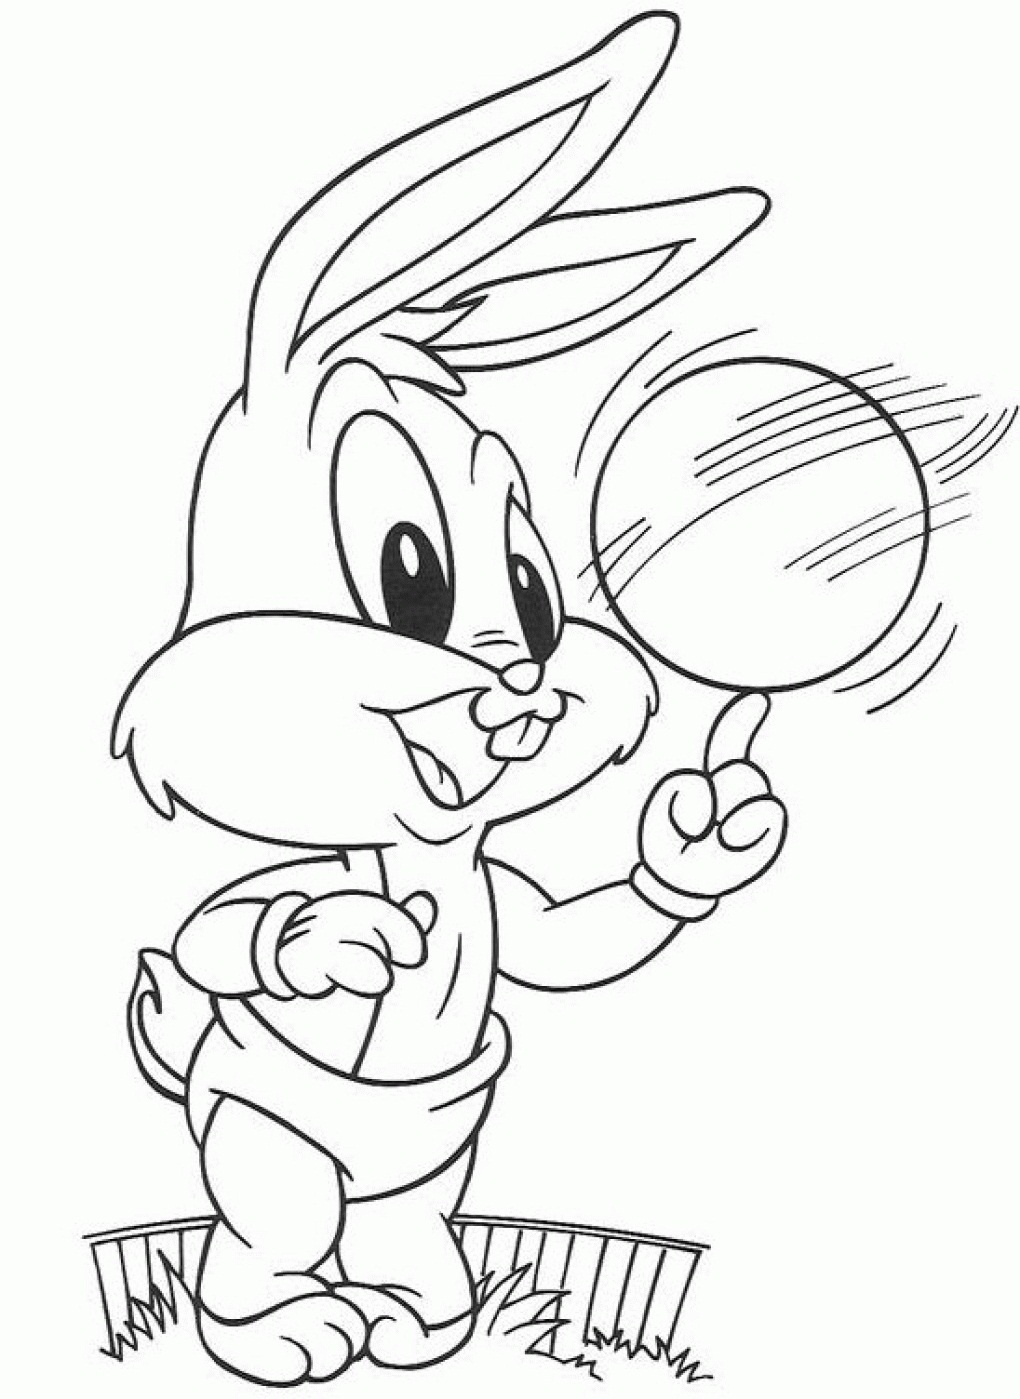 Free Printable Bugs Bunny Coloring Pages For Kids - Free Printable Bugs Bunny Coloring Pages